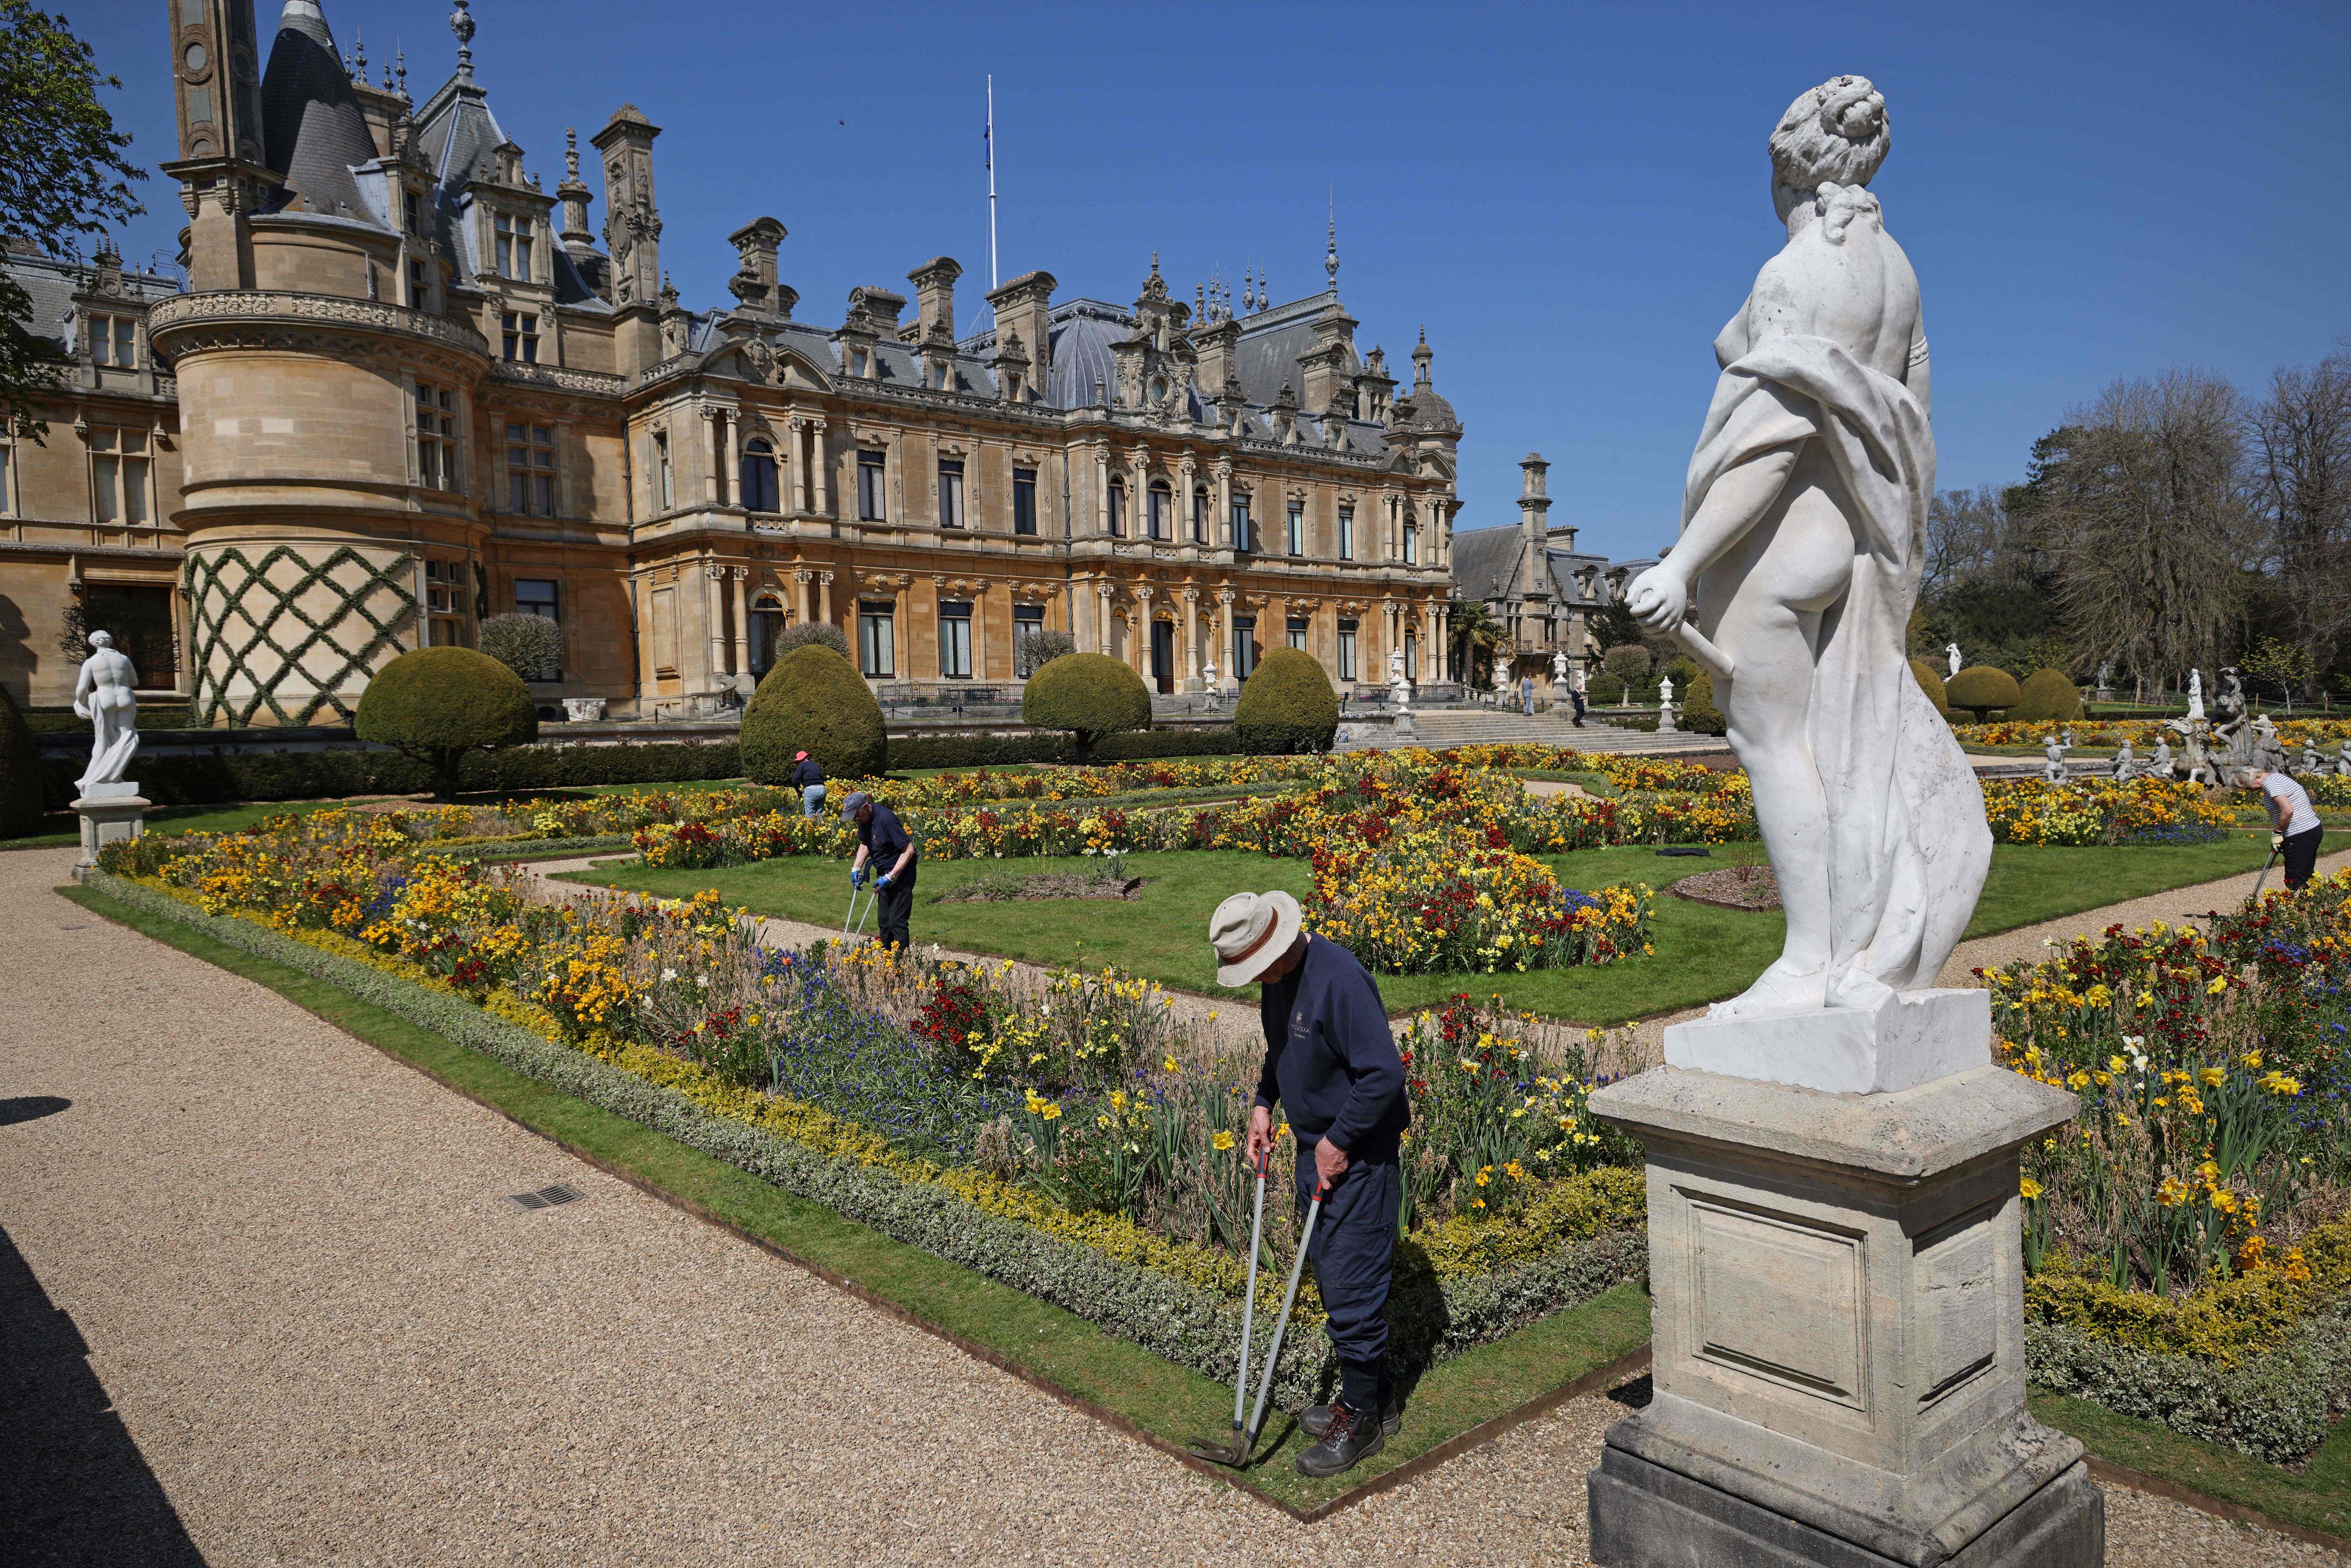 Waddesdon Manor is an extravagant French-style chateau built by the Rothschild family